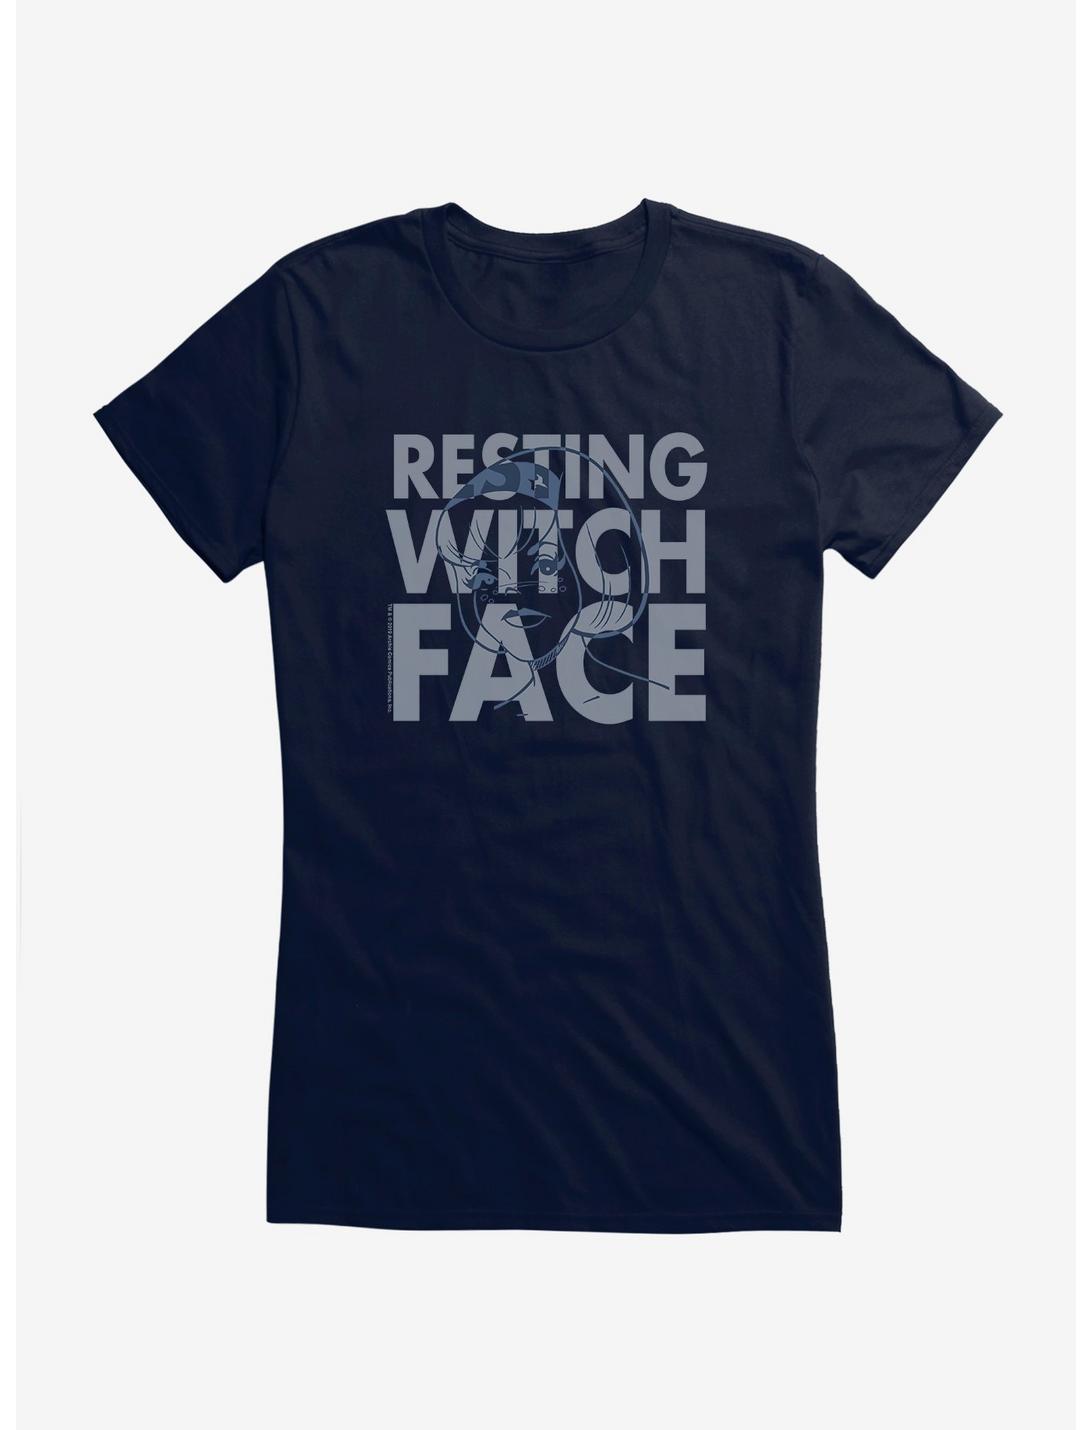 Archie Comics The Chilling Adventures Of Sabrina Resting Witch Face Girls T-Shirt, NAVY, hi-res